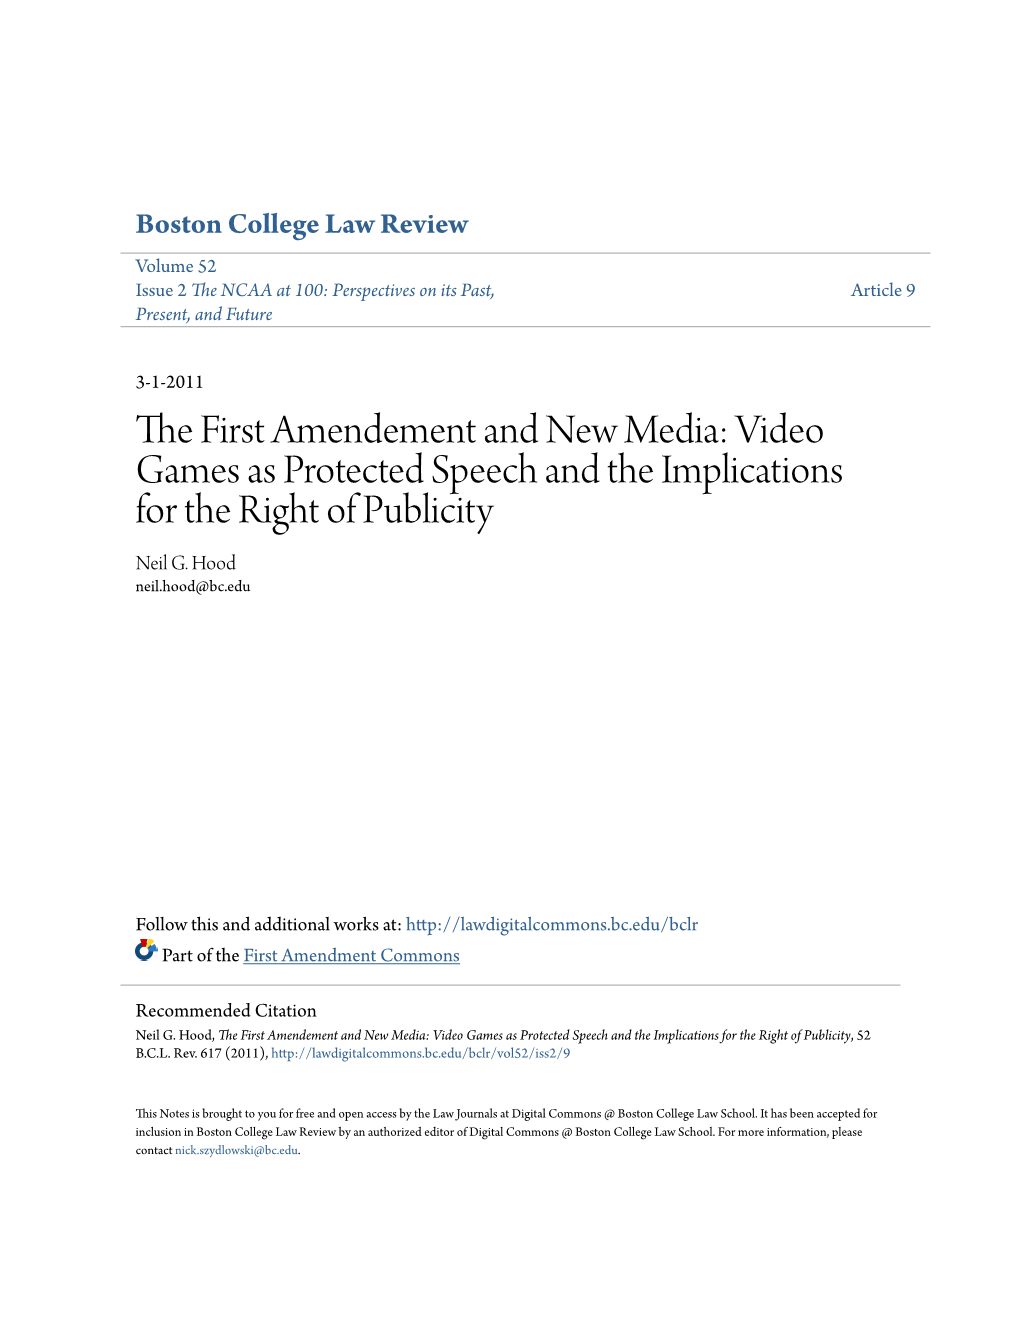 The First Amendement and New Media: Video Games As Protected Speech and the Implications for the Right of Publicity, 52 B.C.L